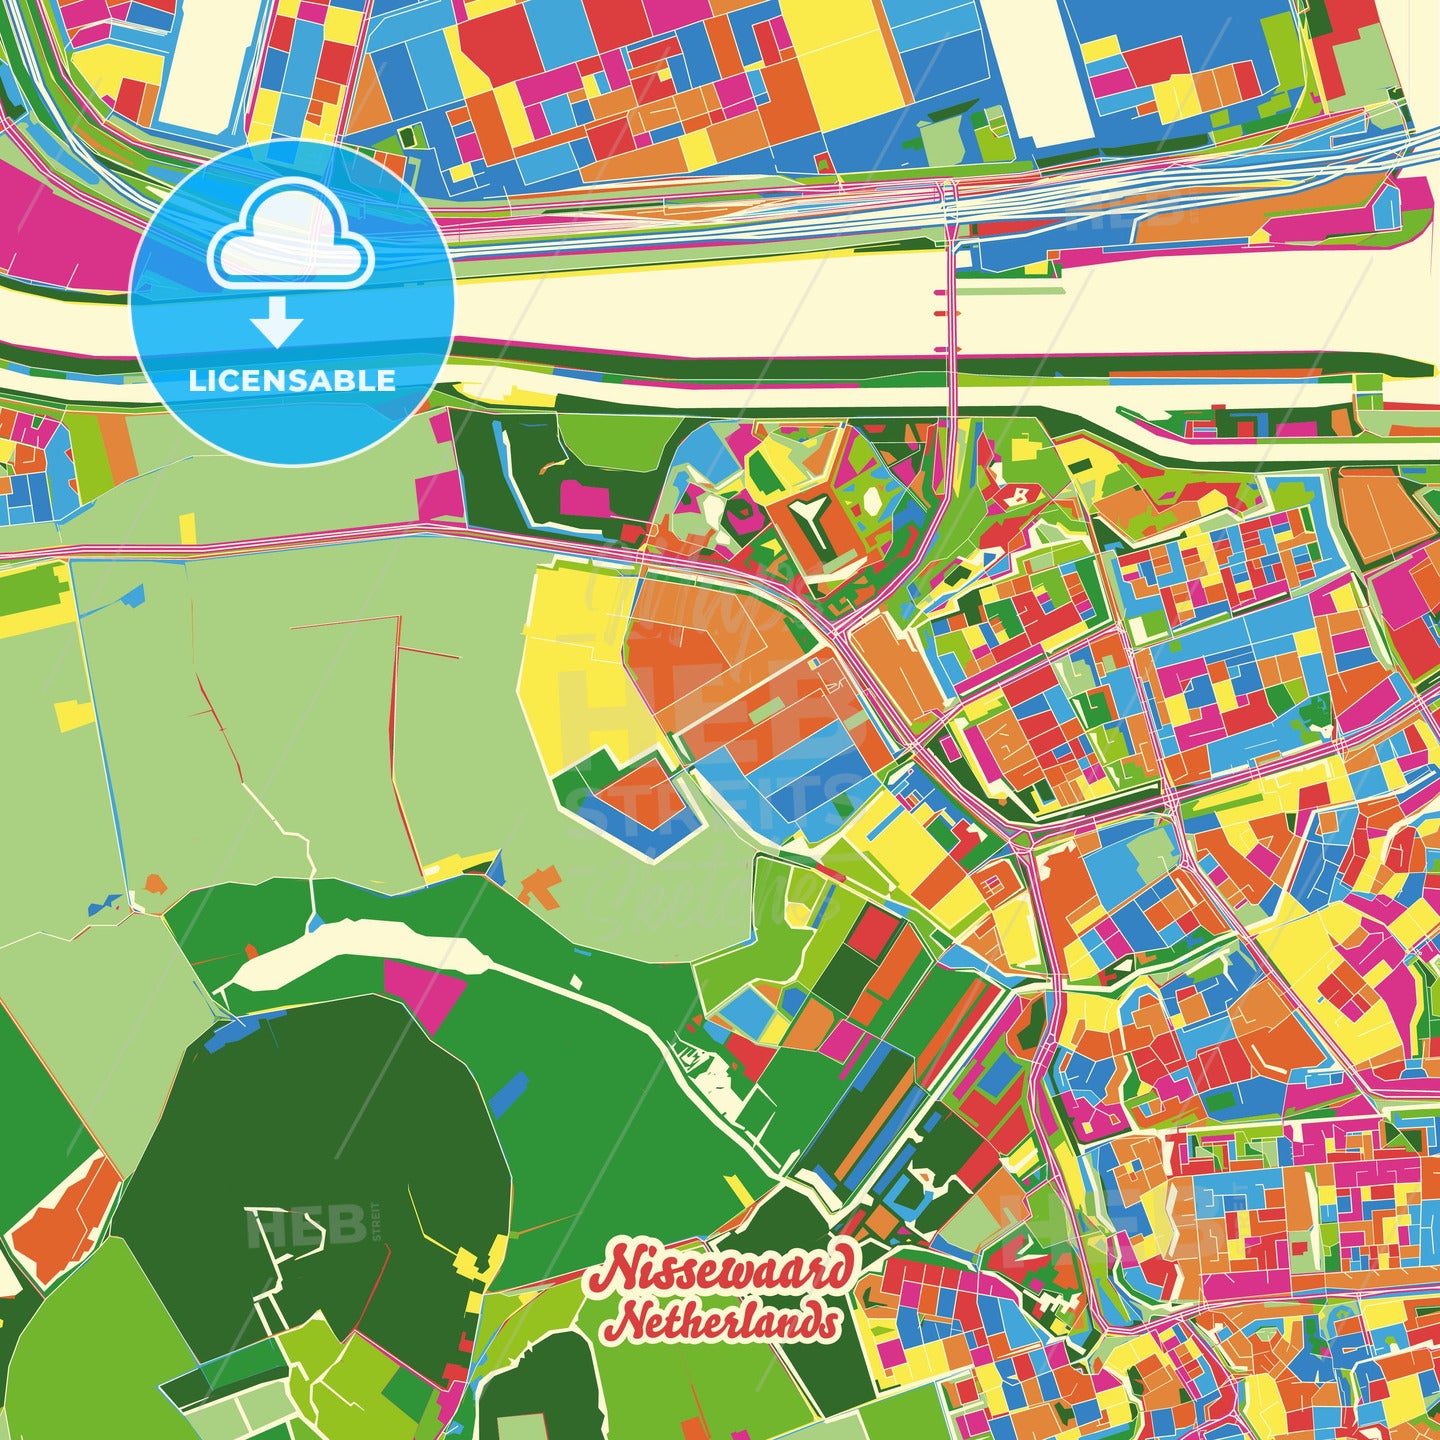 Nissewaard, Netherlands Crazy Colorful Street Map Poster Template - HEBSTREITS Sketches